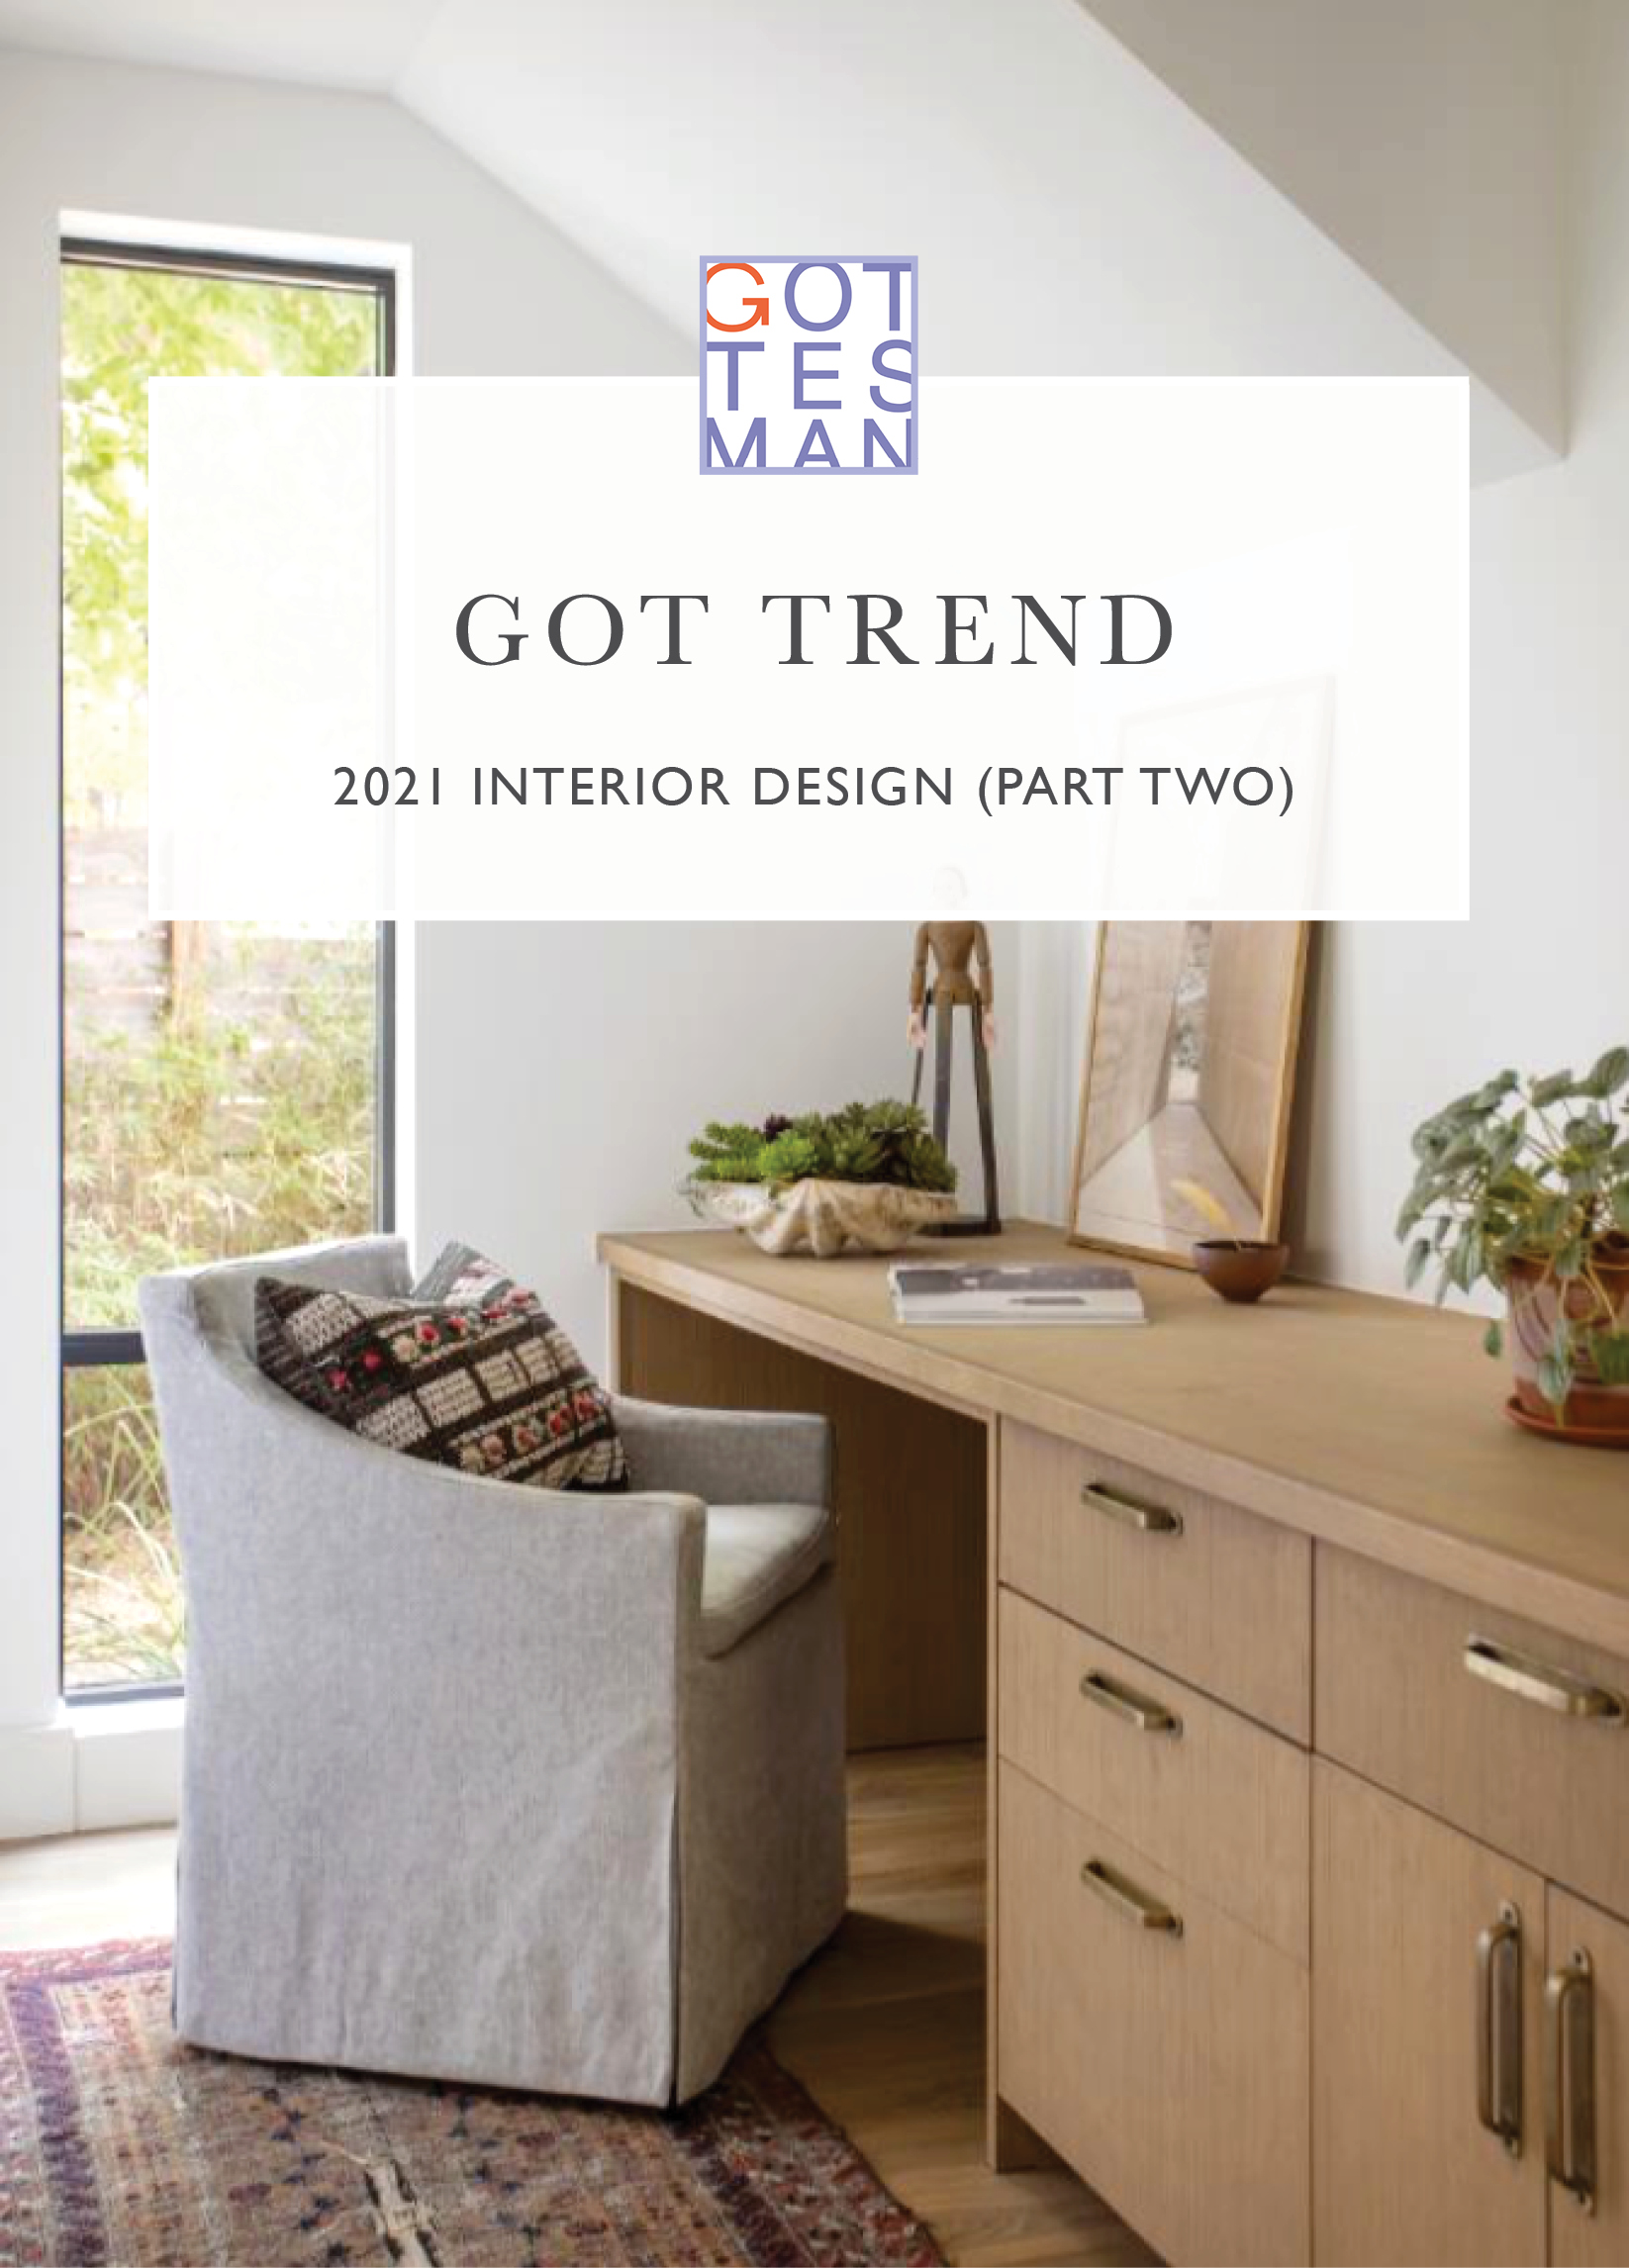 Desk with text overlay, "Got Trend: 2021 Interior Design (Part Two)"